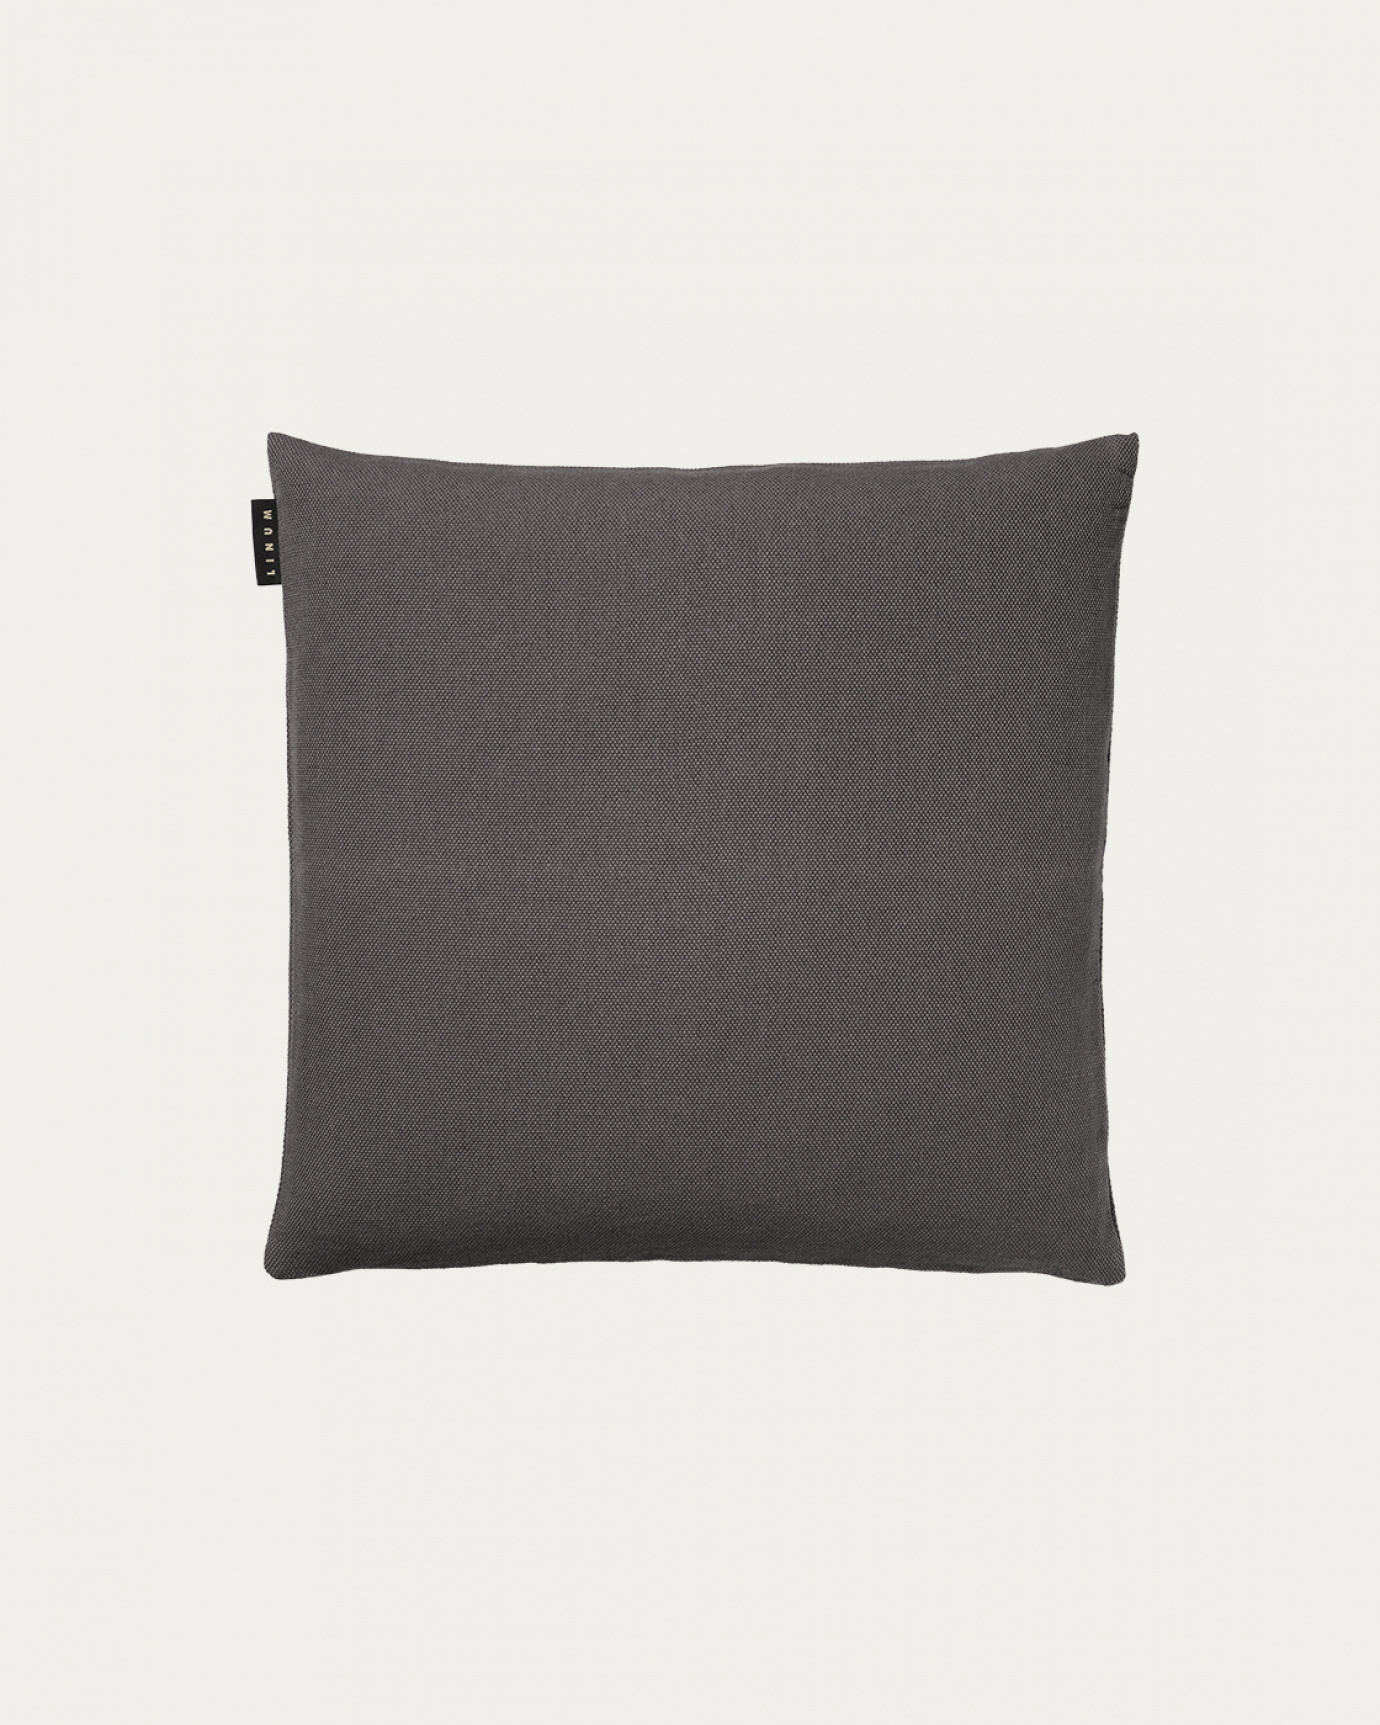 Product image granite grey PEPPER cushion cover made of soft cotton from LINUM DESIGN. Easy to wash and durable for generations. Size 40x40 cm.